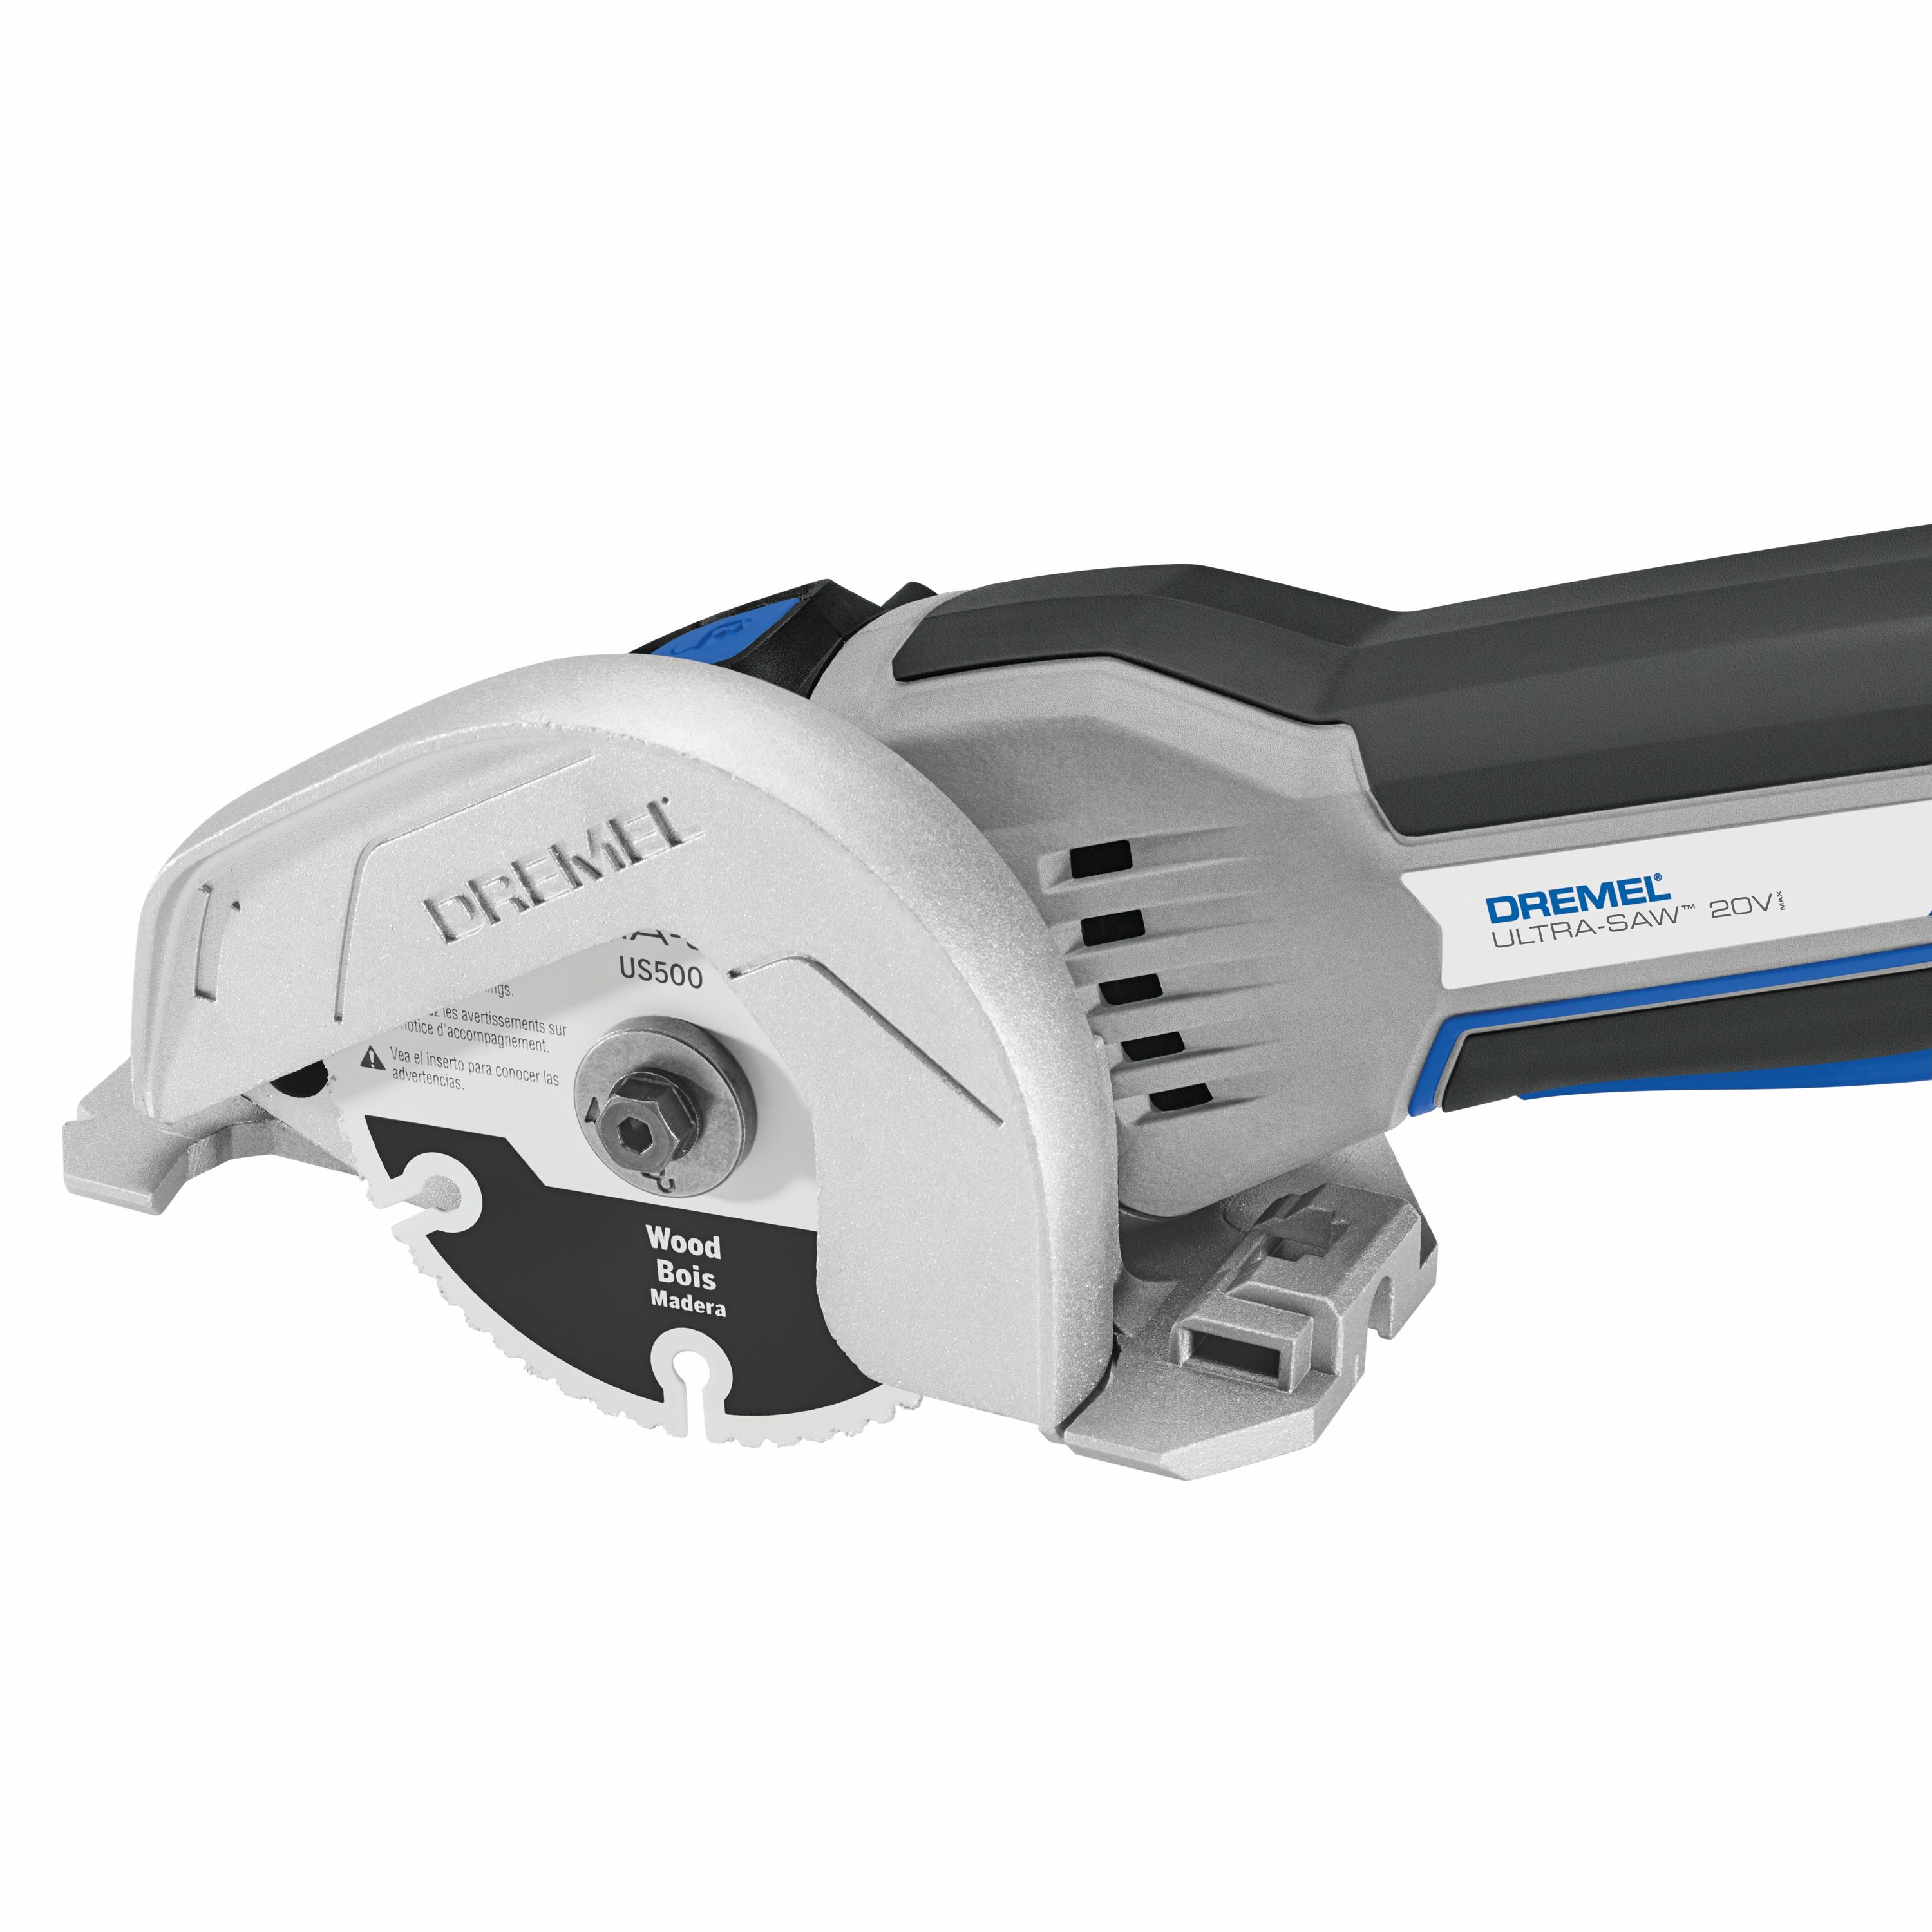 Dremel's Awesome Ultra Saw Goes Cordless